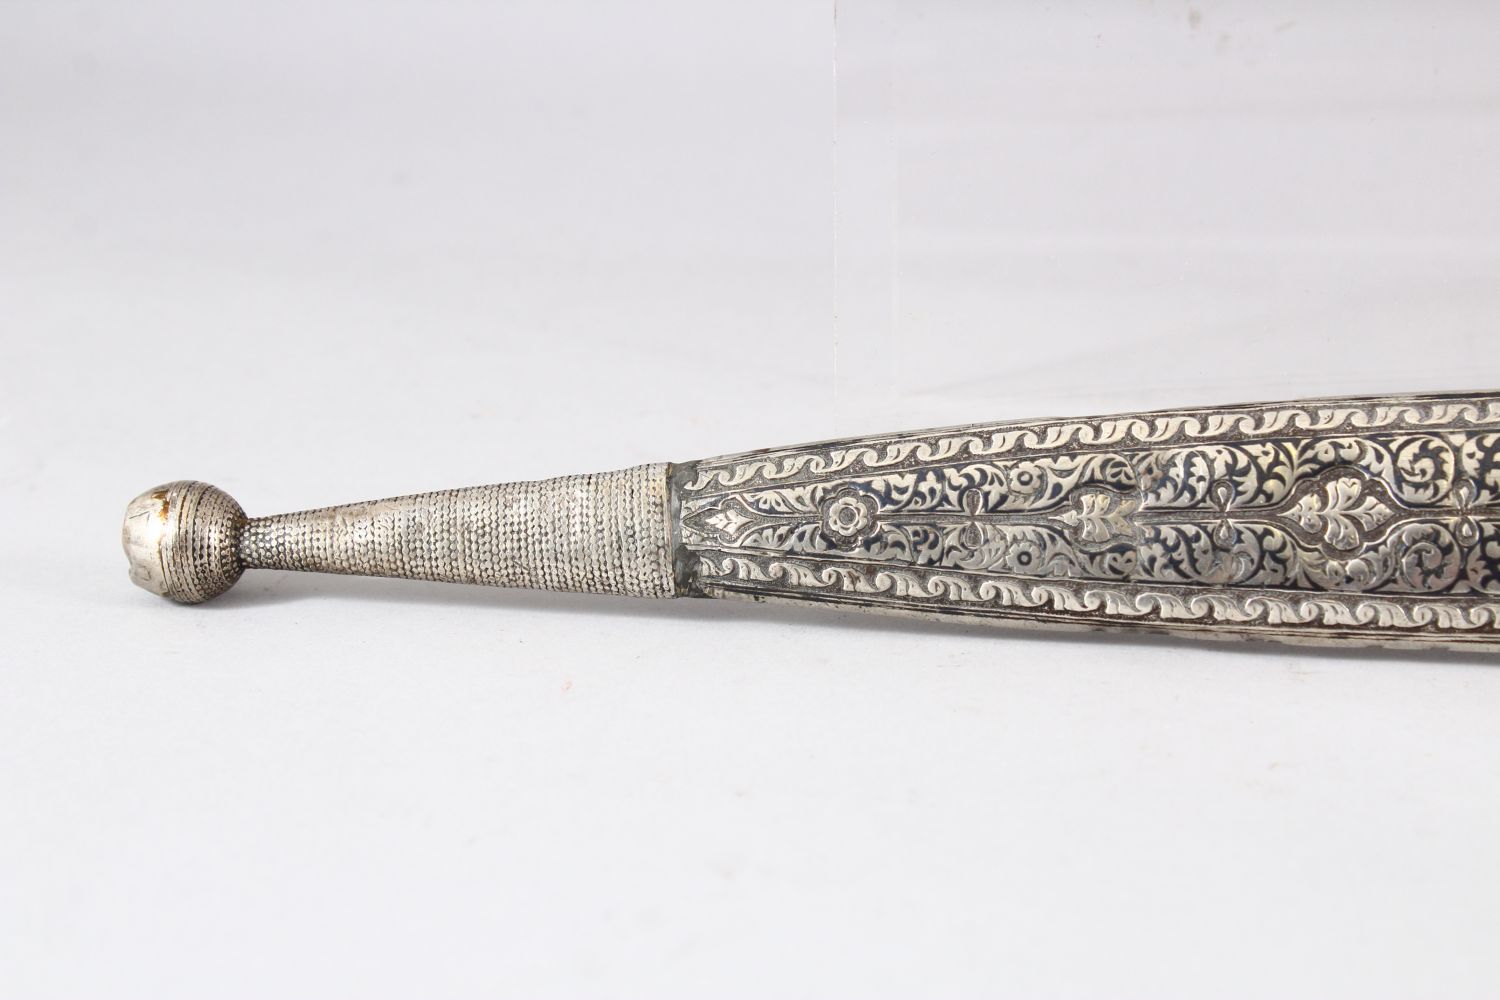 A 19TH CENTURY KINDJAL DAGGER and scabbard, 47.5cm long. - Image 2 of 8